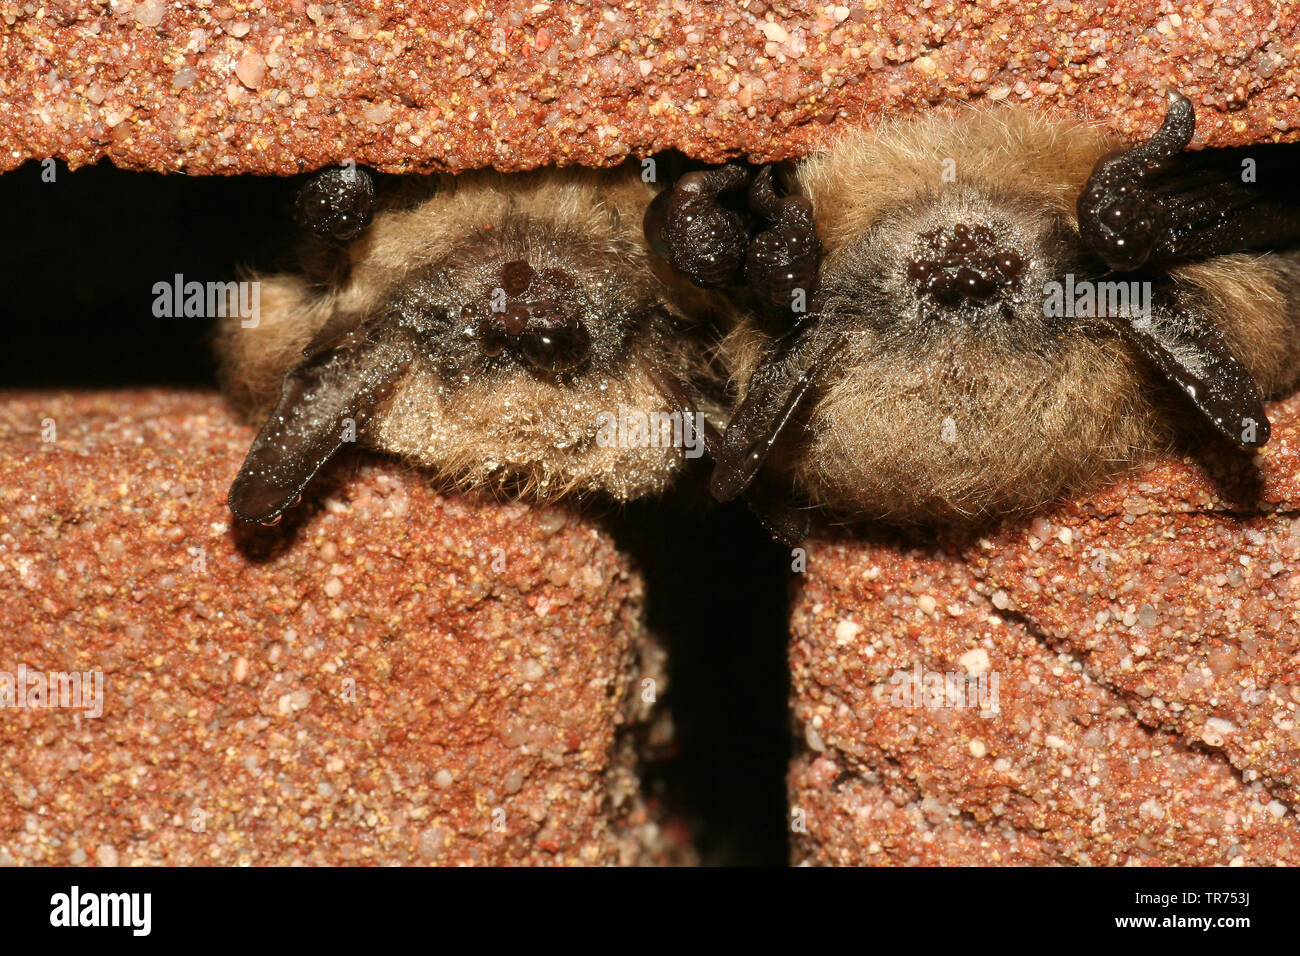 Whiskered bat (Myotis mystacinus), in crevices in a wall, Netherlands Stock Photo